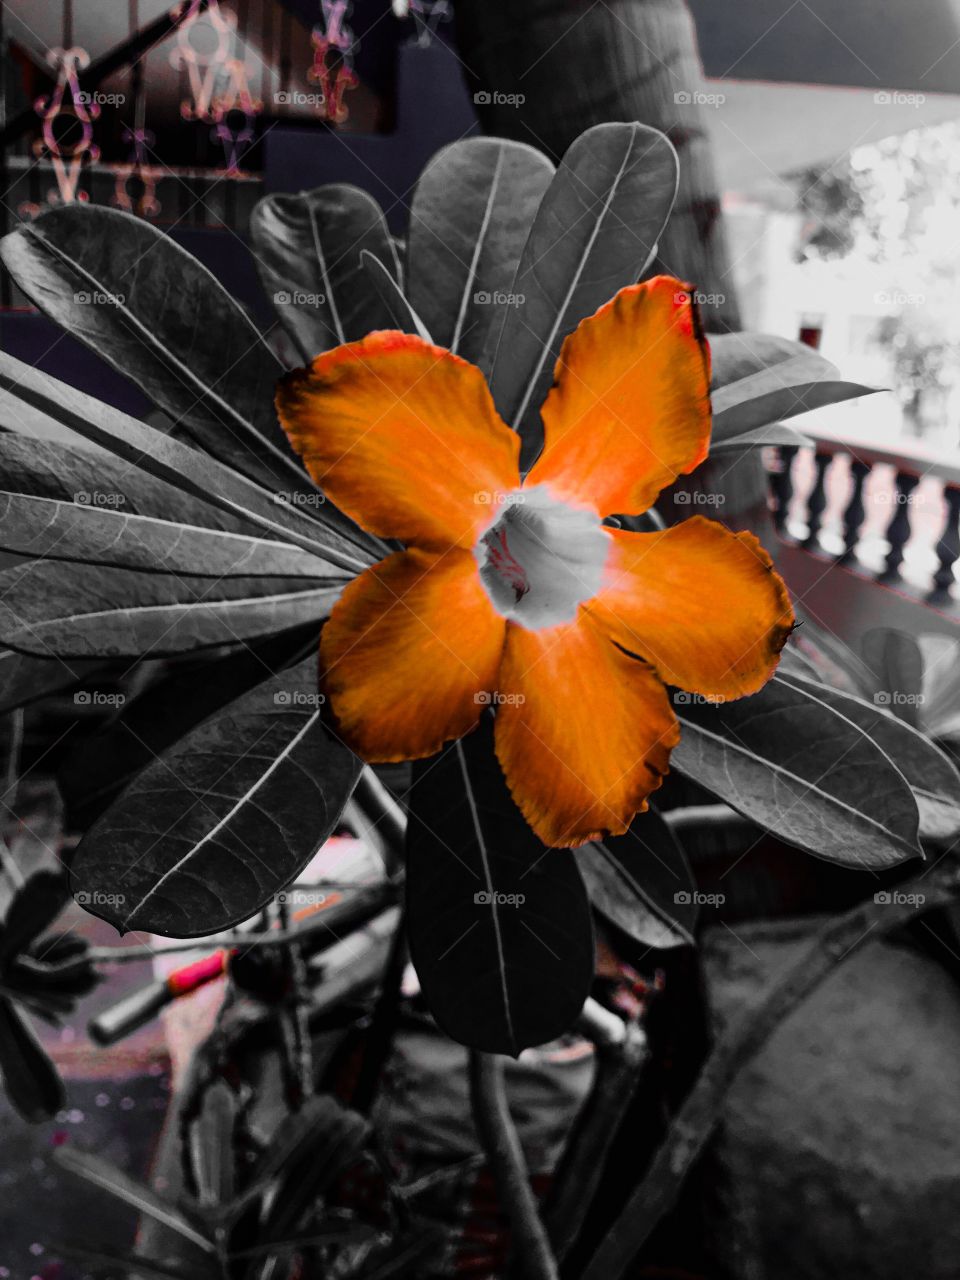 Black&white and color of the leaves and flower 🌹